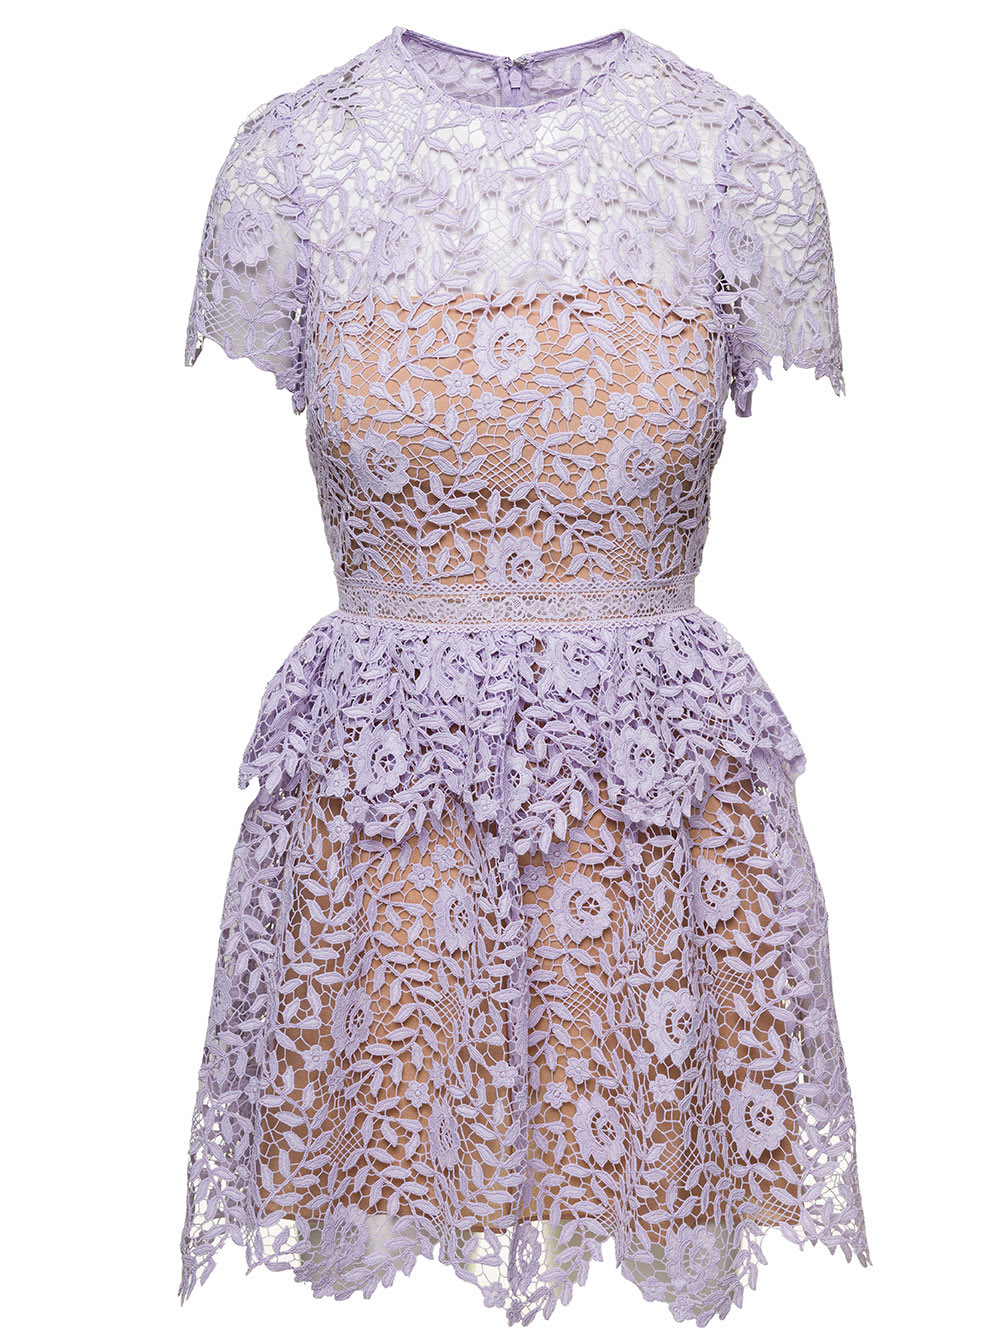 SELF-PORTRAIT GUIPURE PEPLUM DRESS WITH ALL-OVER FLORAL EMBROIDERY IN LILAC LACE WOMAN